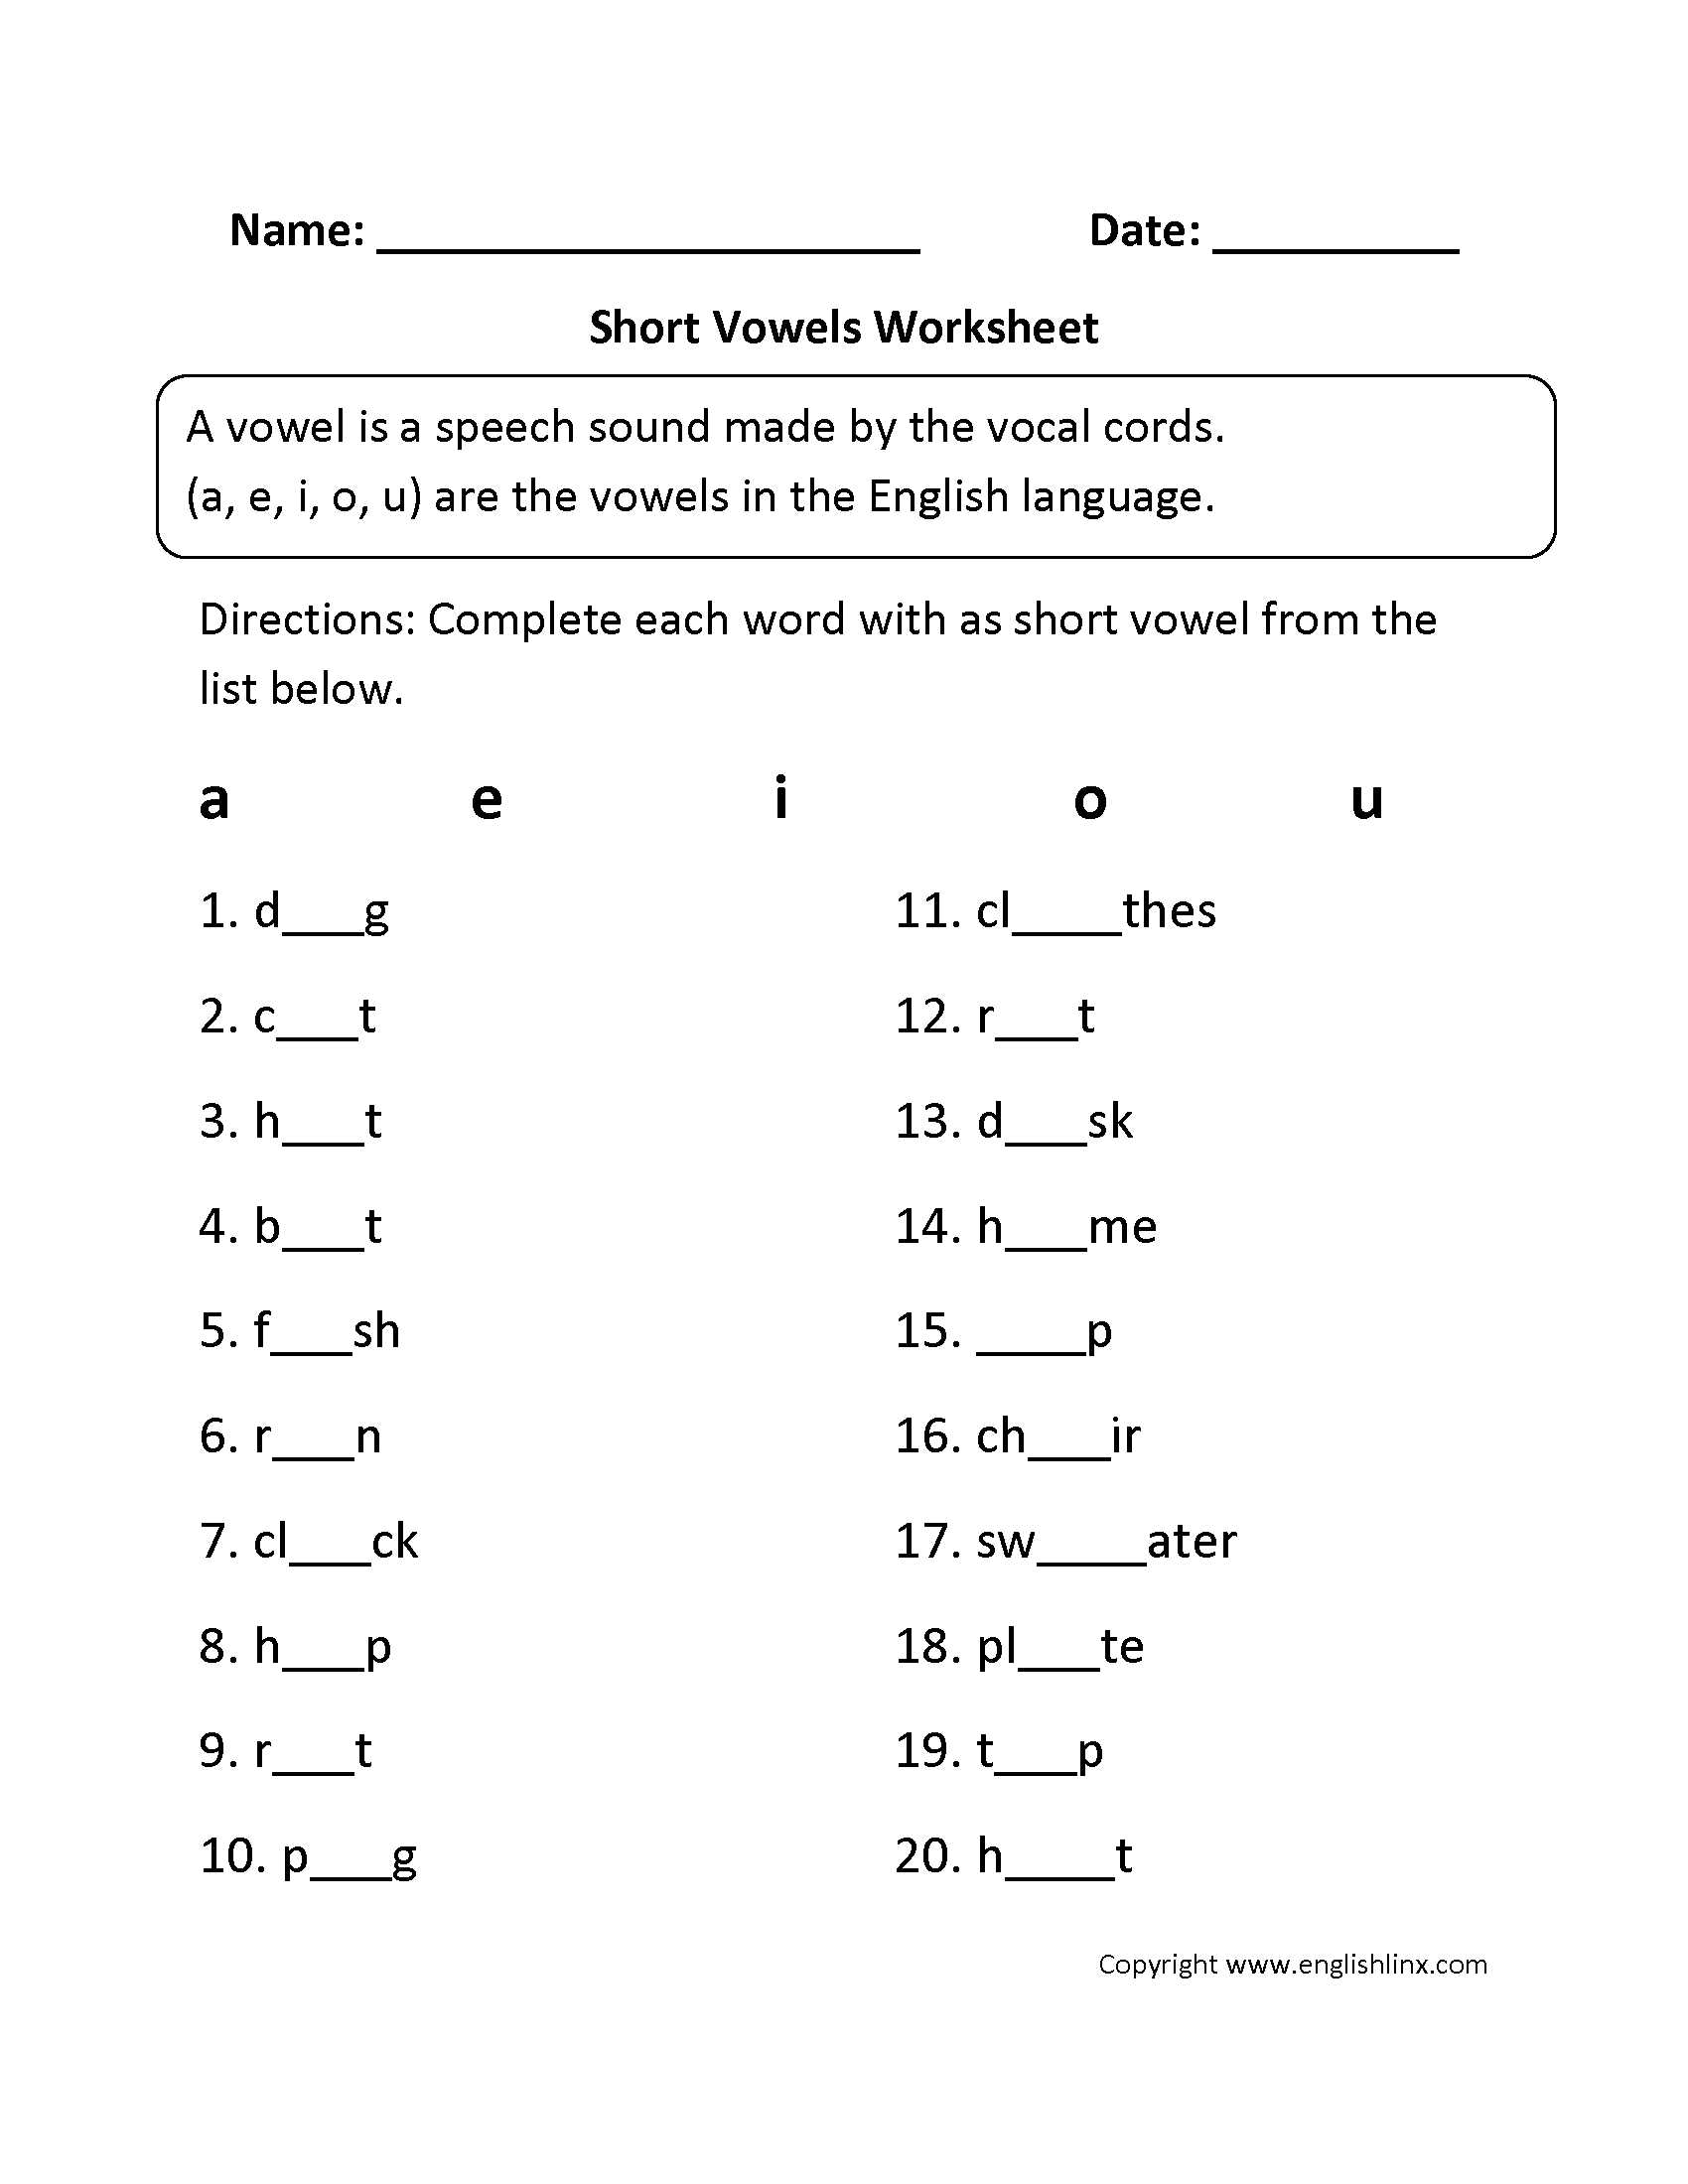 Identifying Parts Of Speech Worksheet together with Parts Speech Worksheets for 3rd Grade Image Collections